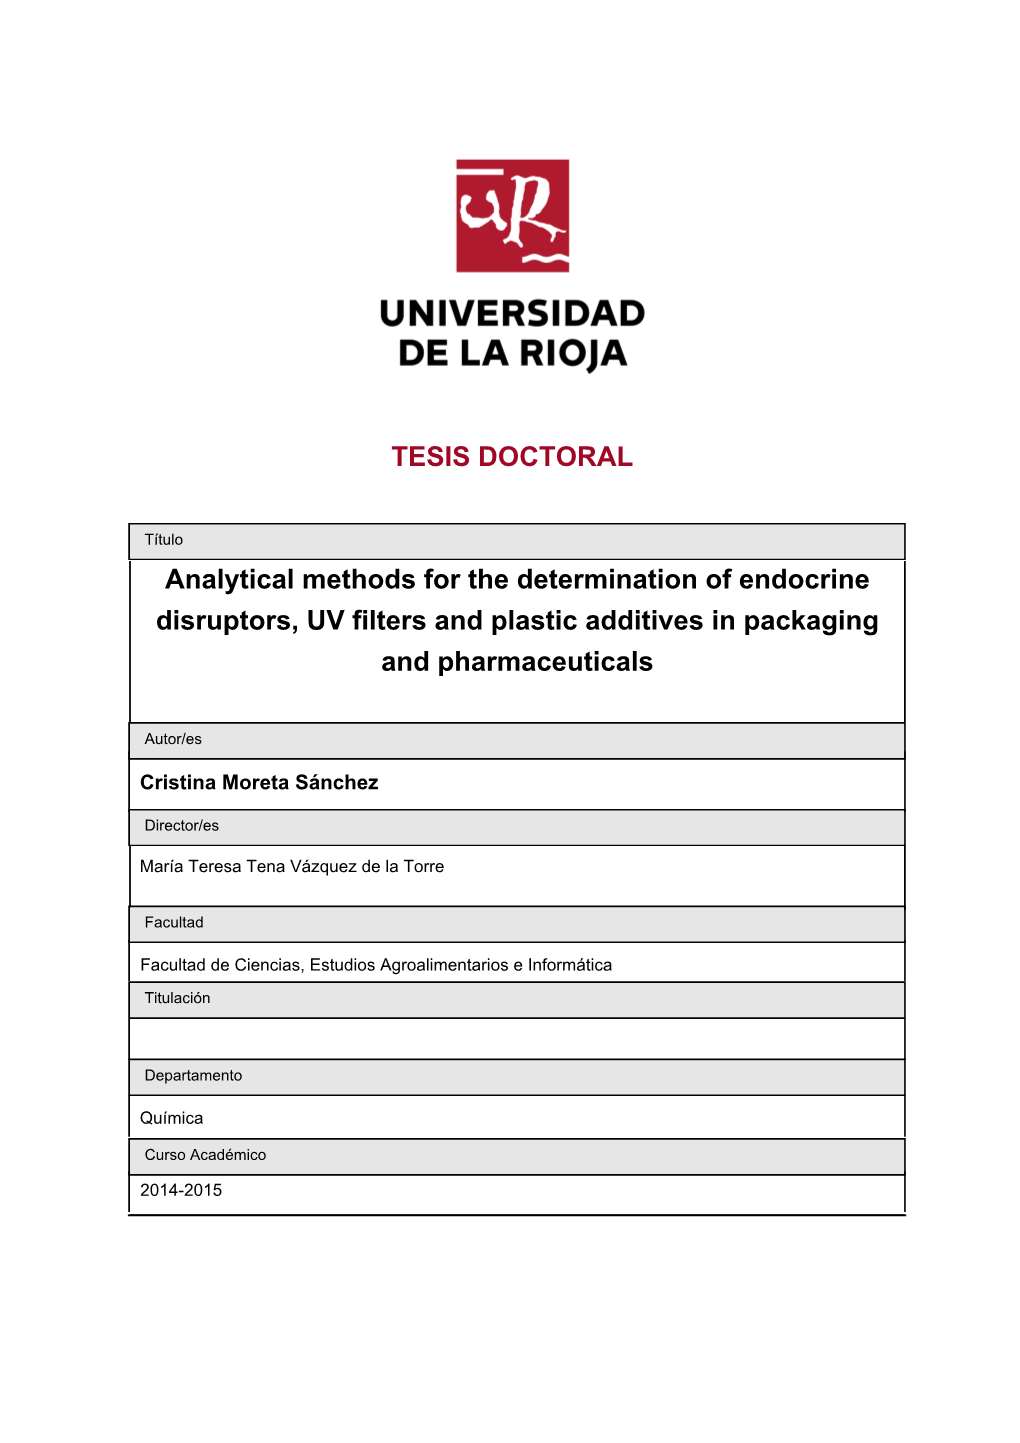 Analytical Methods for the Determination of Endocrine Disruptors, UV Filters and Plastic Additives in Packaging and Pharmaceuticals